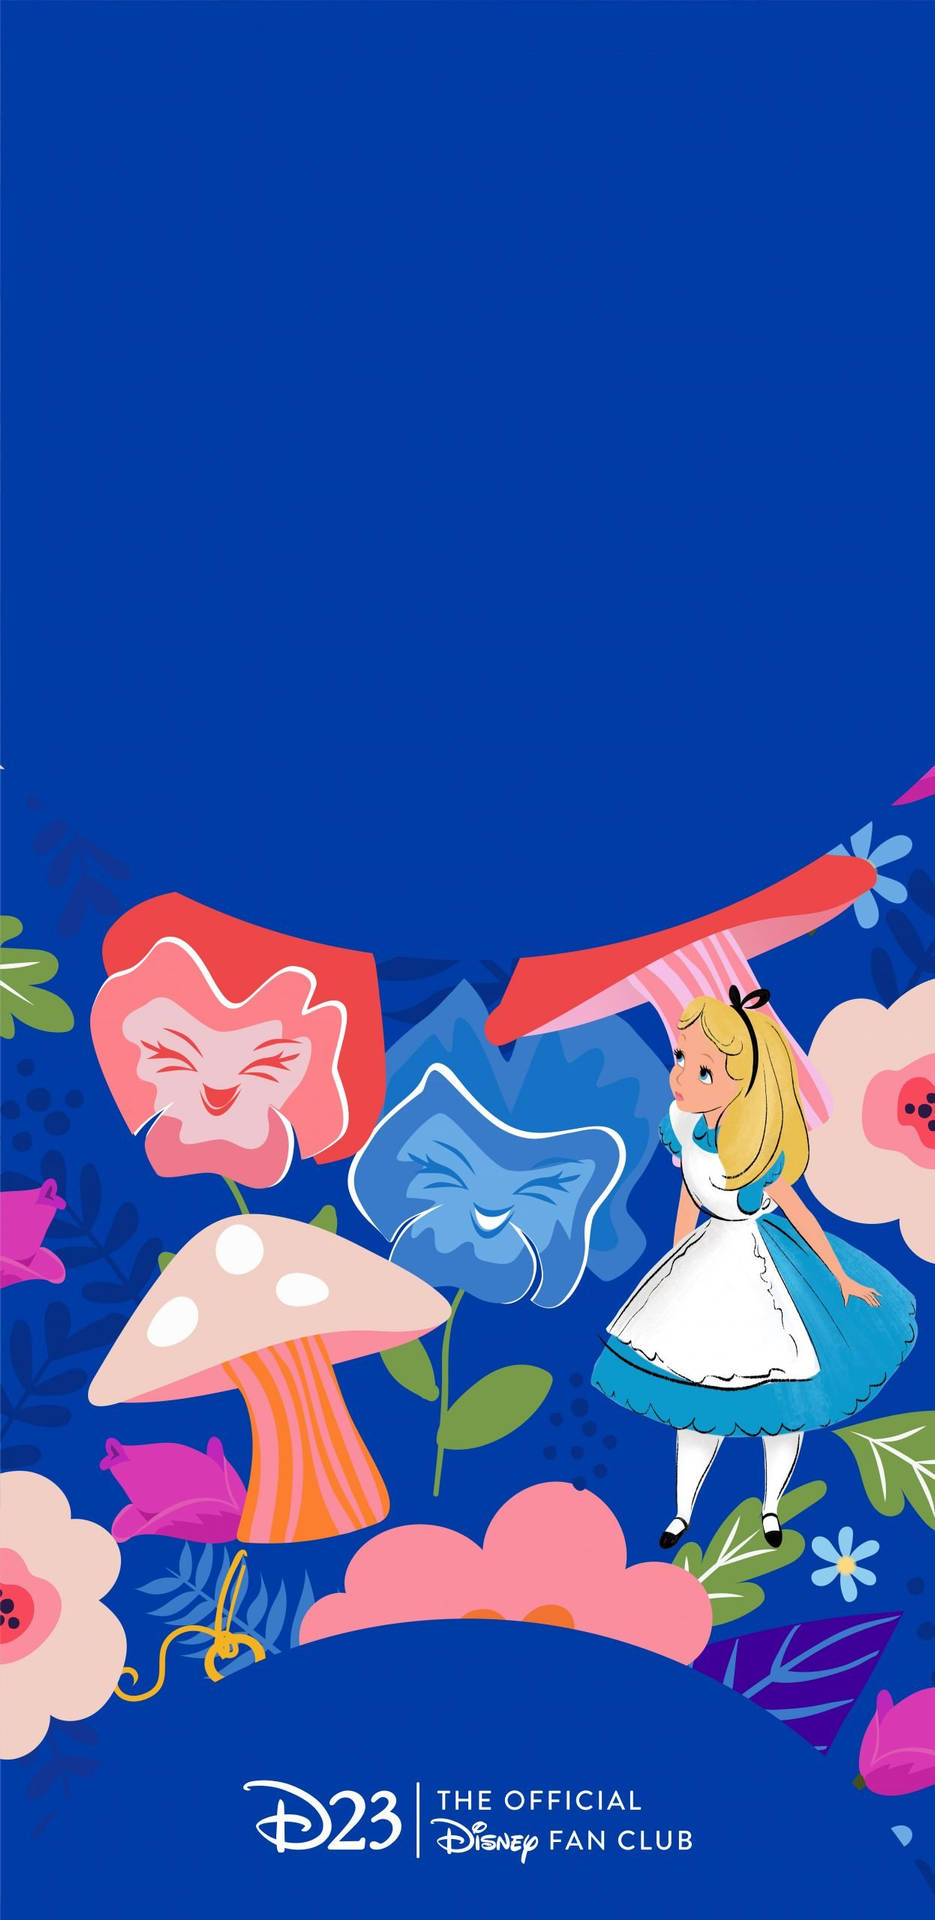 Take a Trip Down the Rabbit Hole with Alice in Wonderland Phone Wallpaper